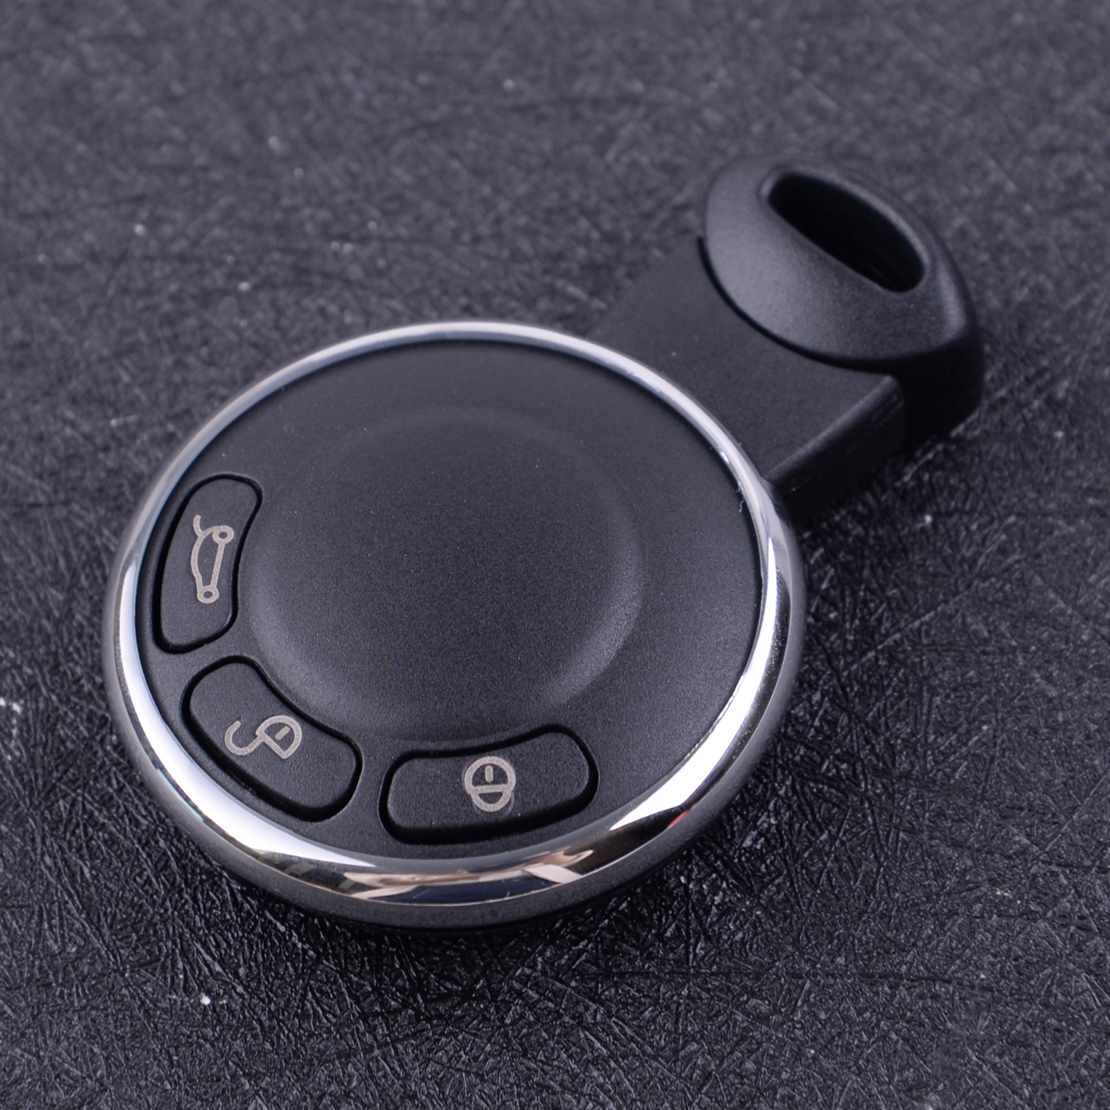 Fit For Bmw Mini Cooper 07 14 Remote Key Fob 3 Buttons Case Shell Cover Rings Ebay